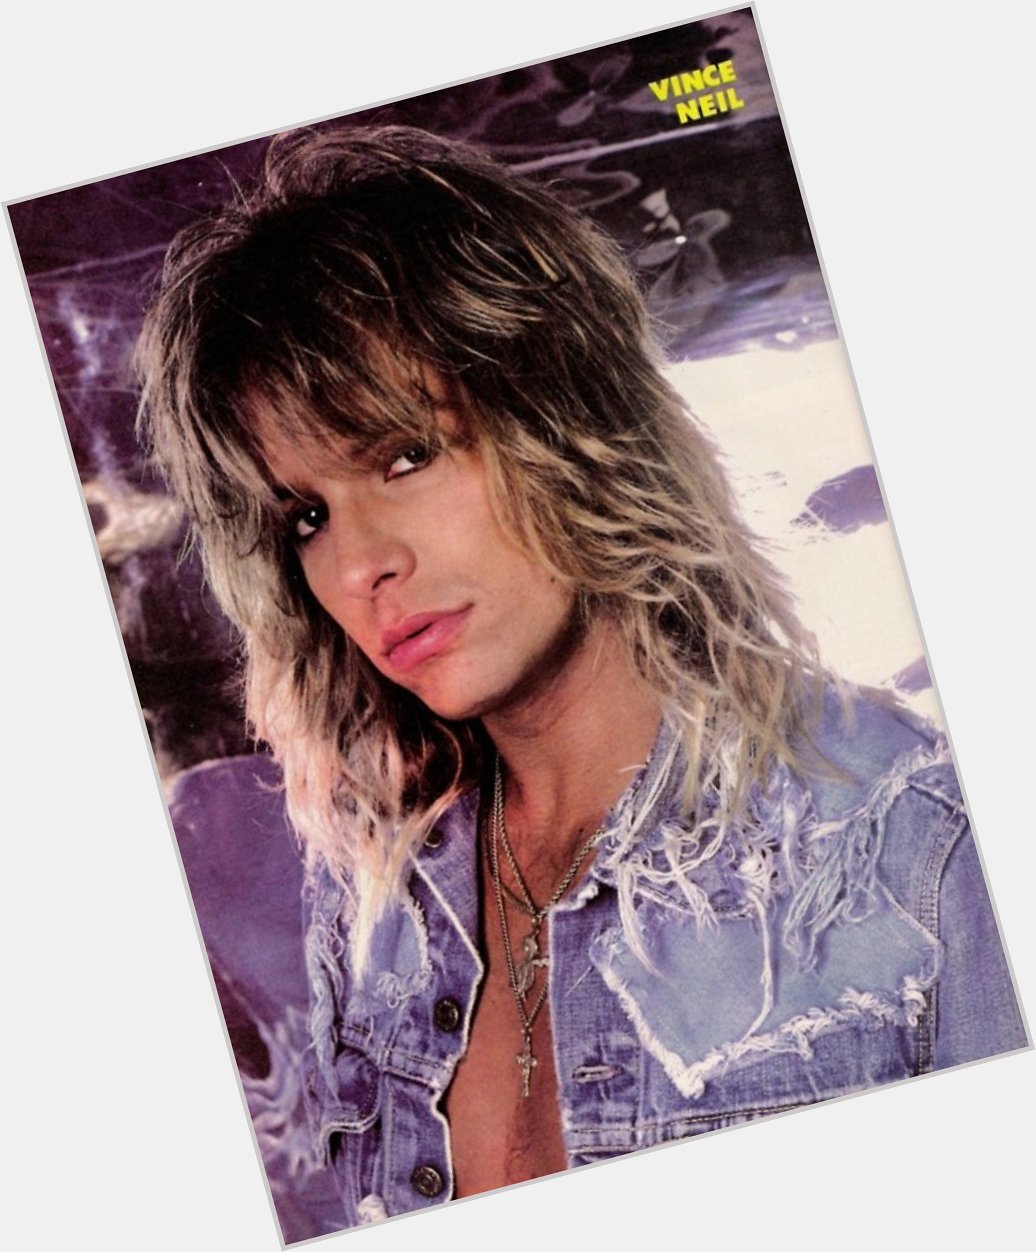 He sure got some purrty lips!
Happy birthday Vince Neil! 